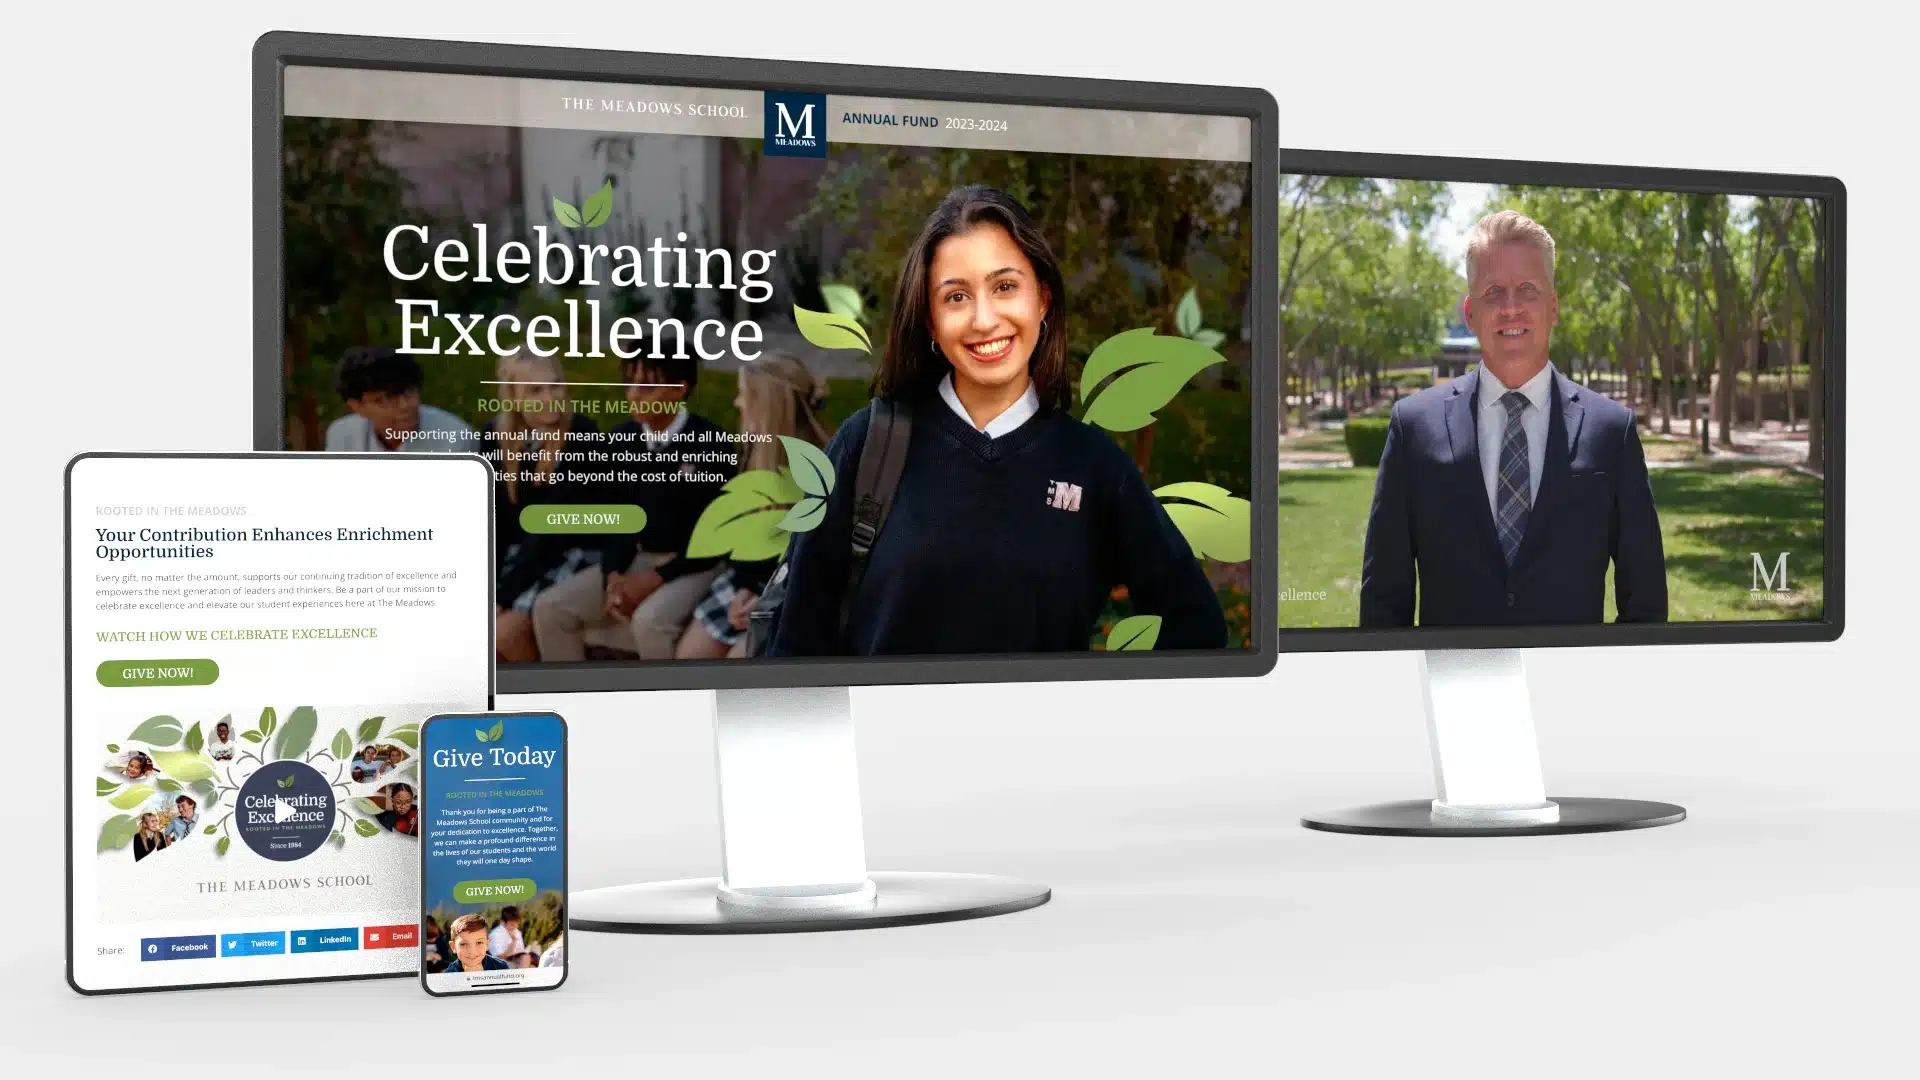 The Meadows School Annual Fund Website page and Video on screens